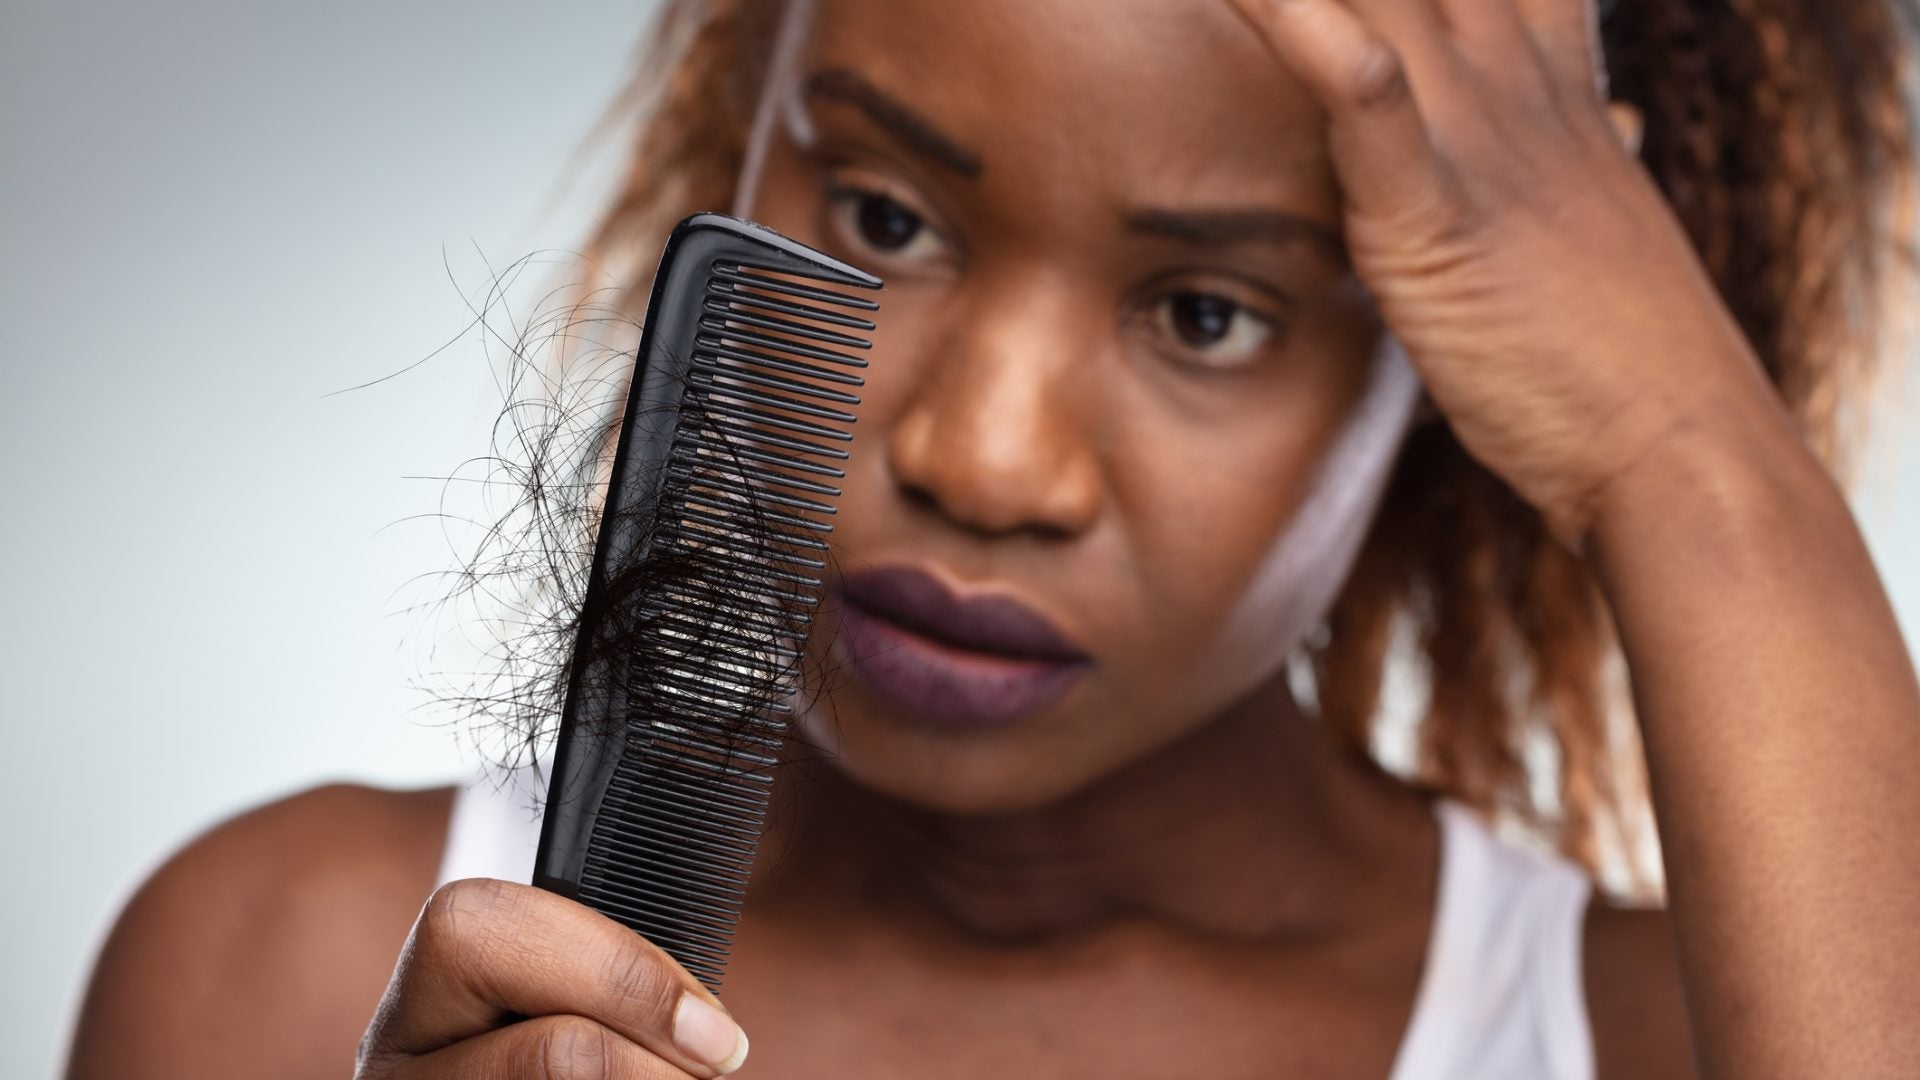 Here’s What You Should Understand About Hair Loss From A Trichologist And Dermatologist